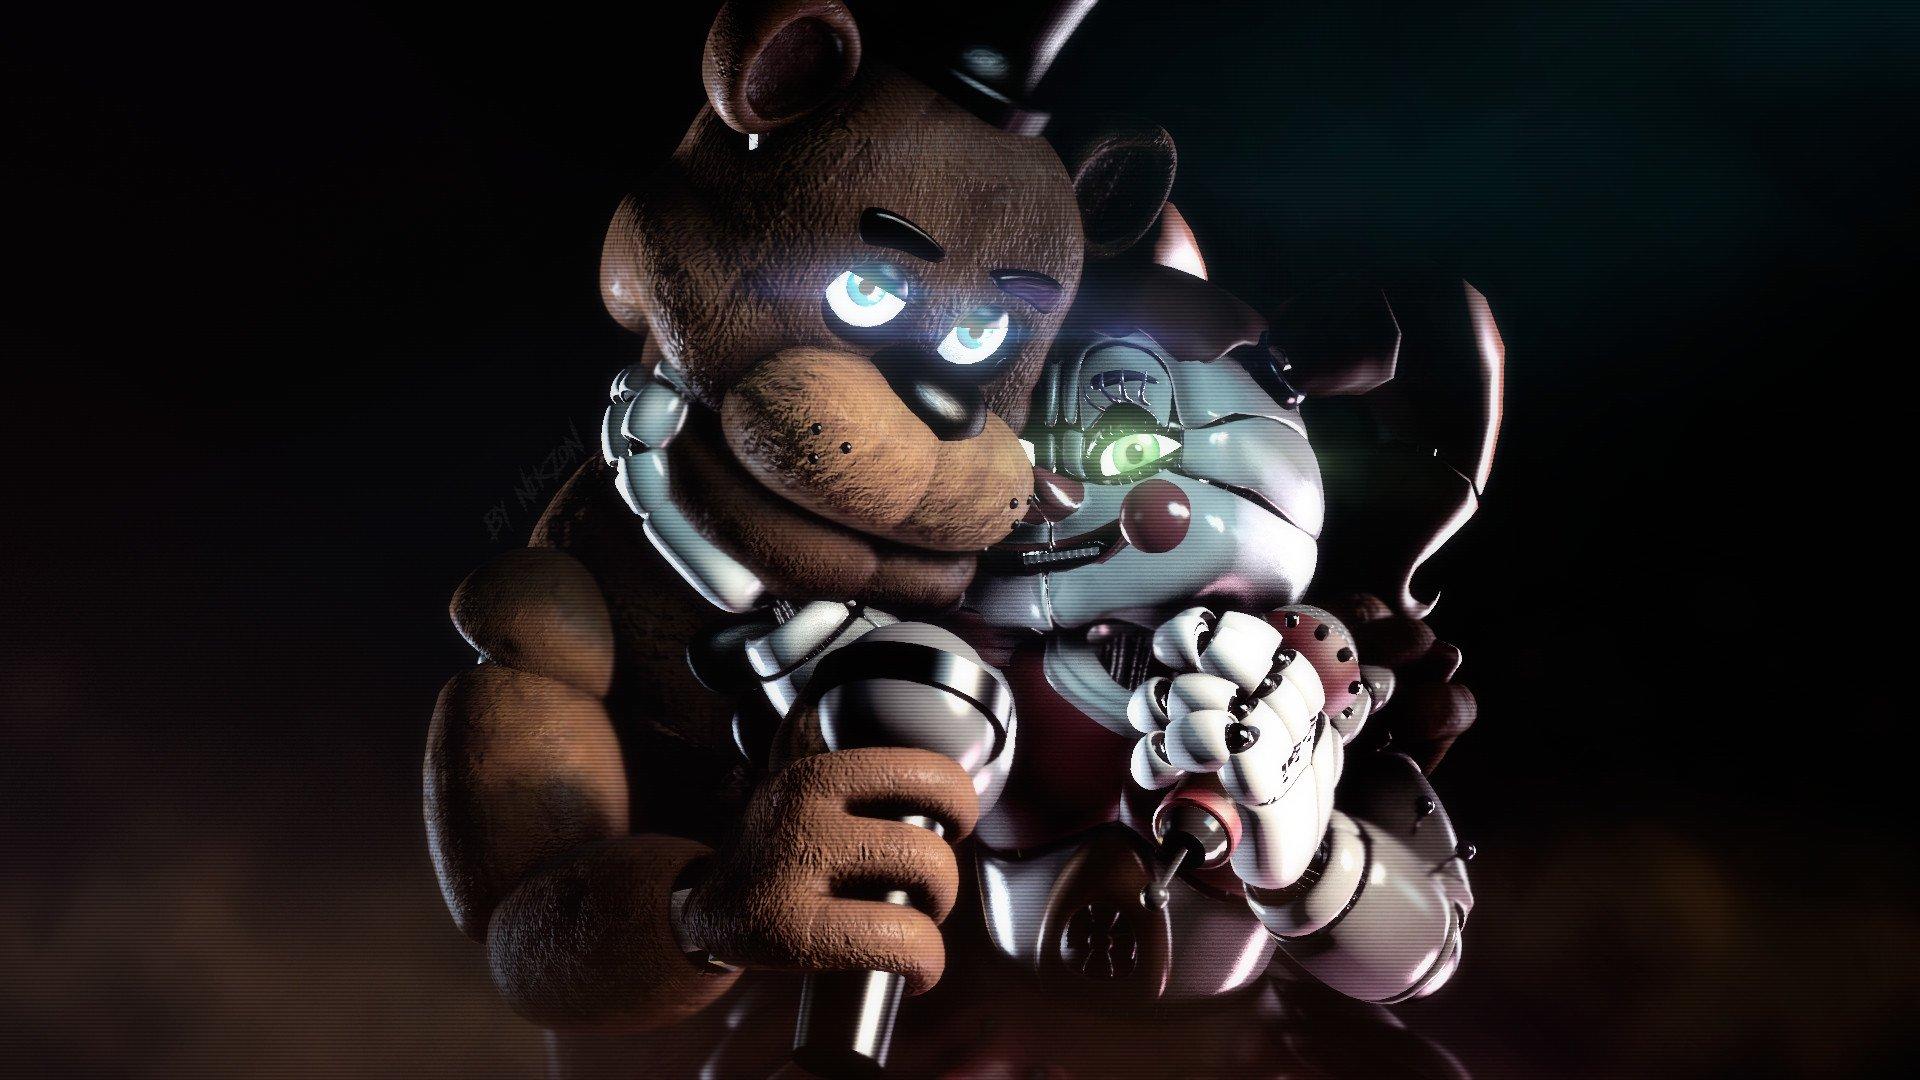 Five Nights at Freddy's: Sister Location HD Wallpaper